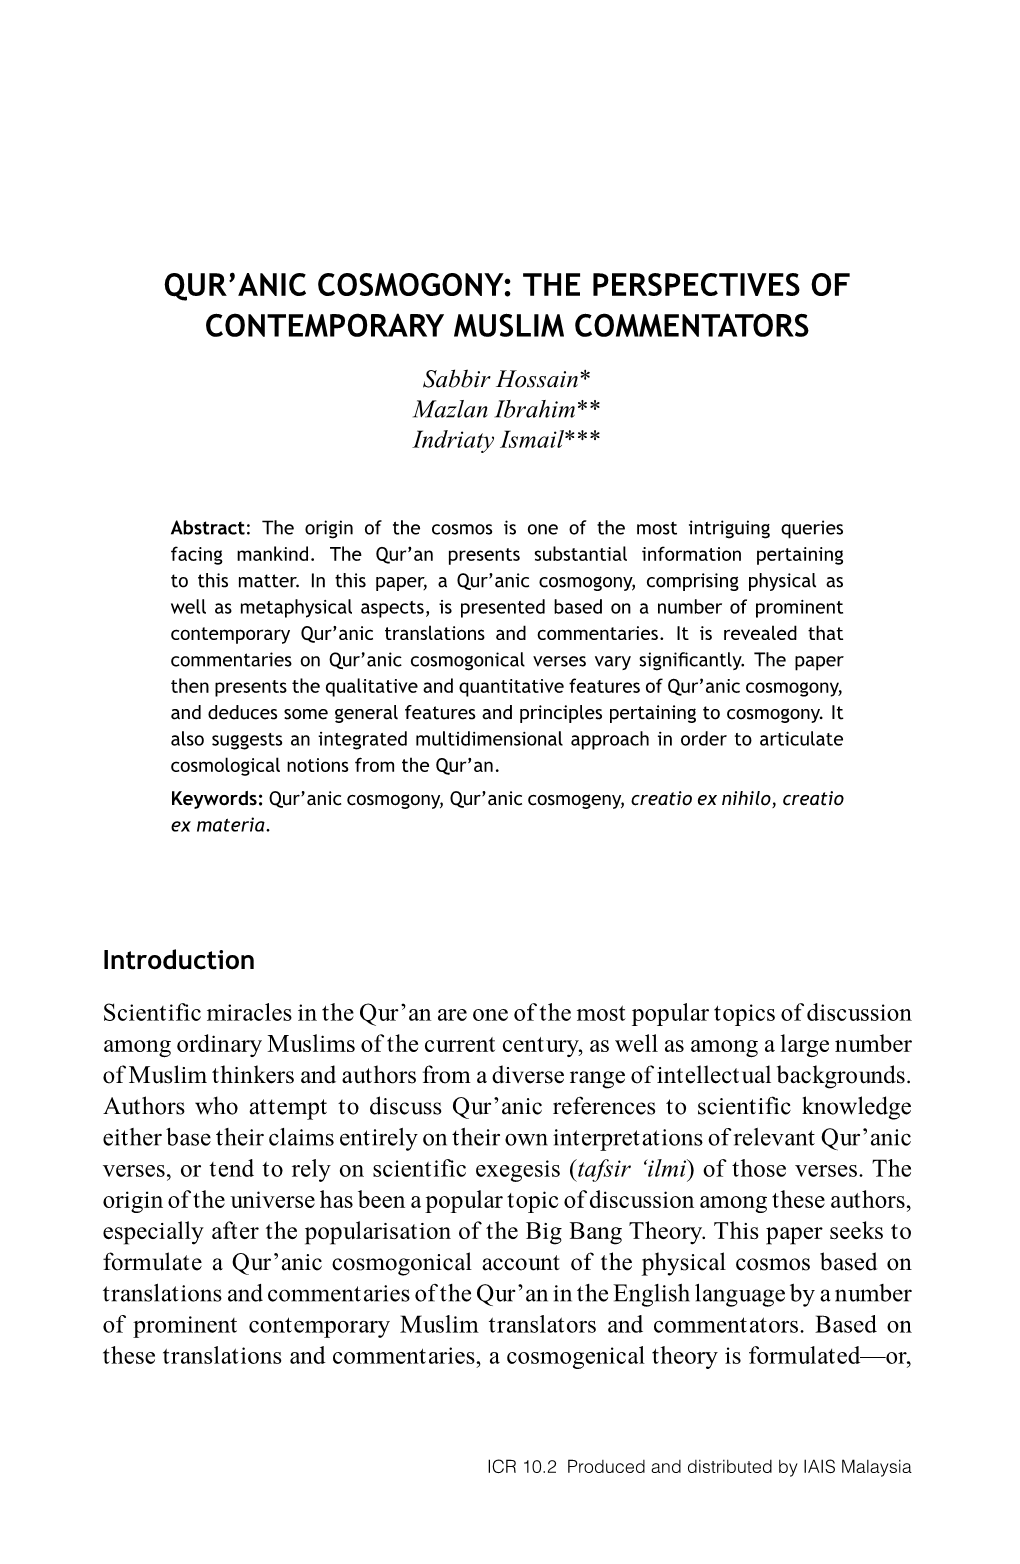 Qur'anic Cosmogony: the Perspectives of Contemporary Muslim